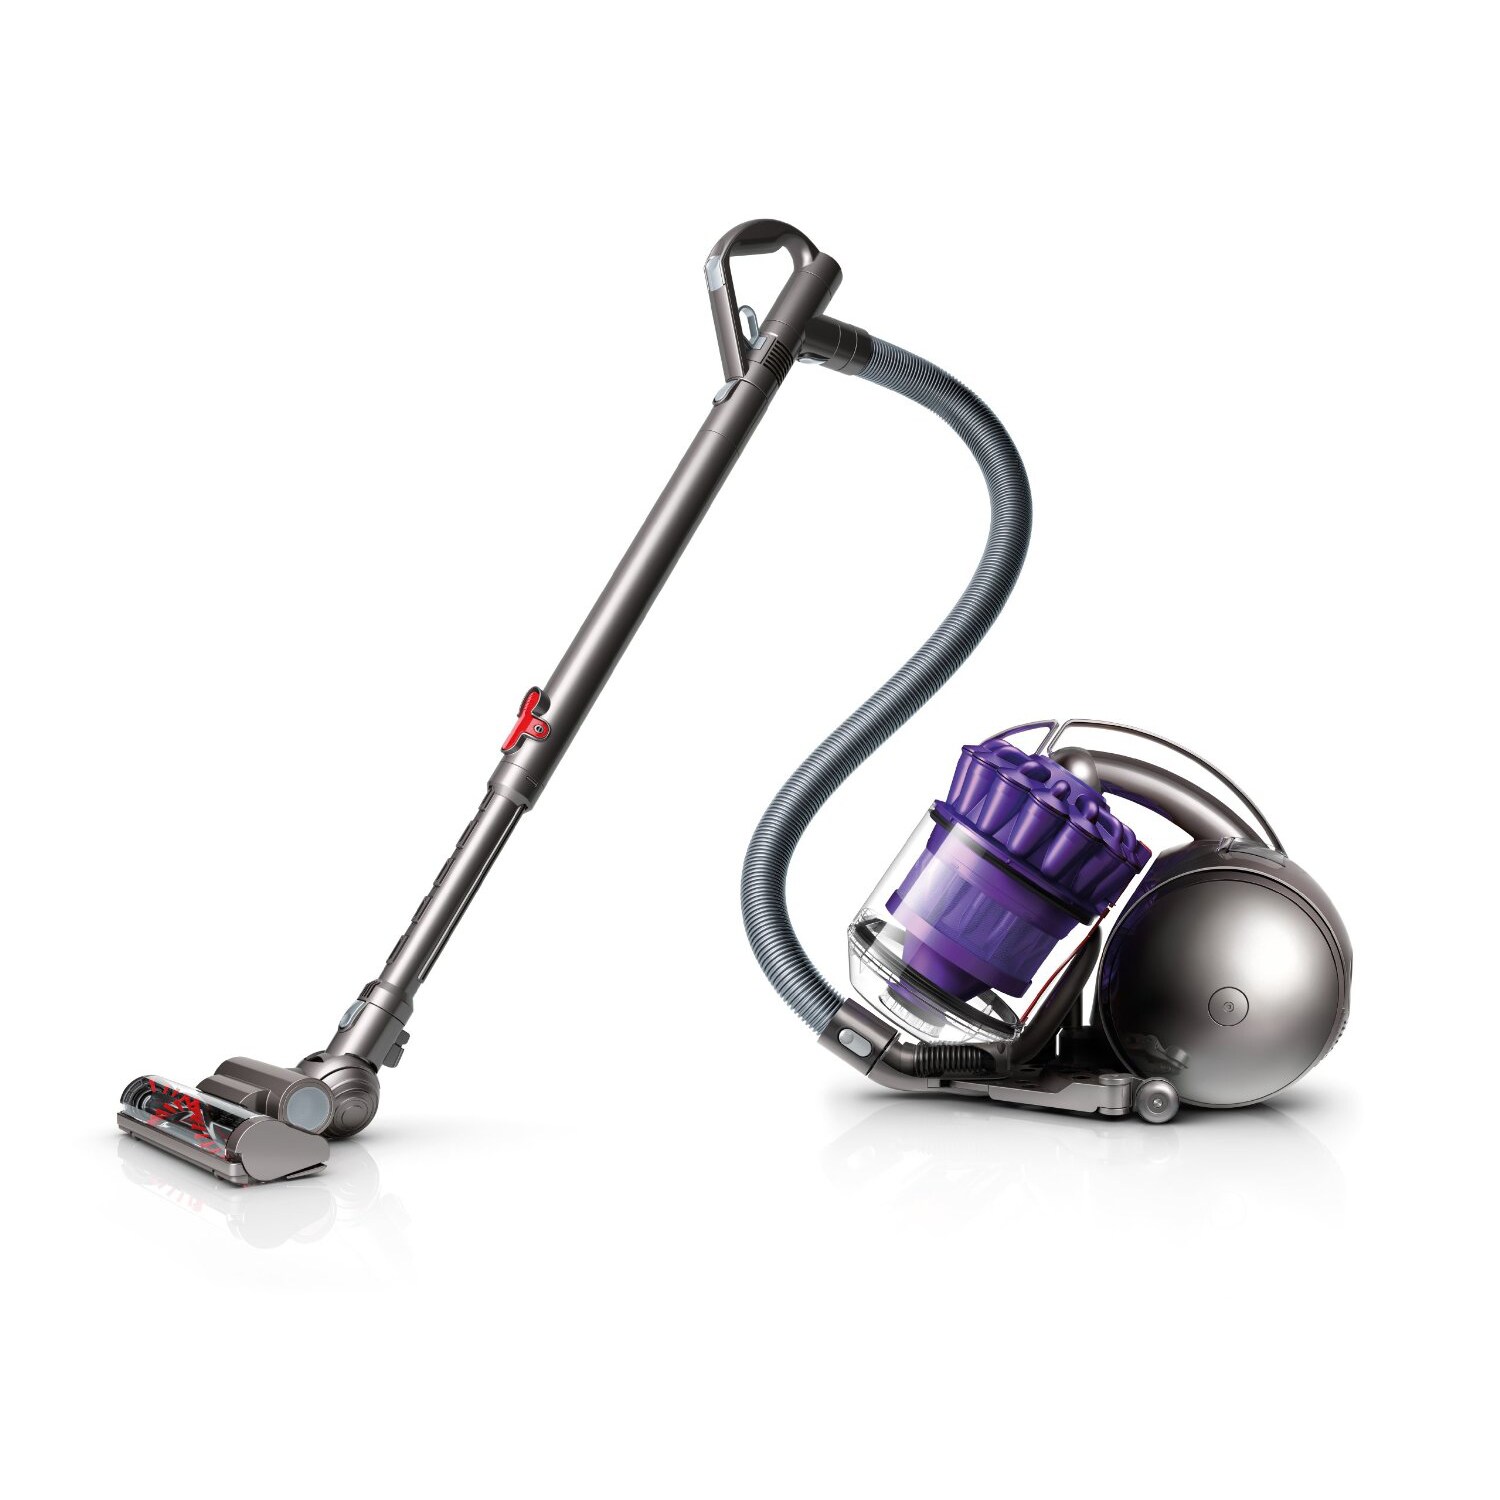 Dyson DC39 Animal Canister Vacuum Cleaner with Tangle free Turbine